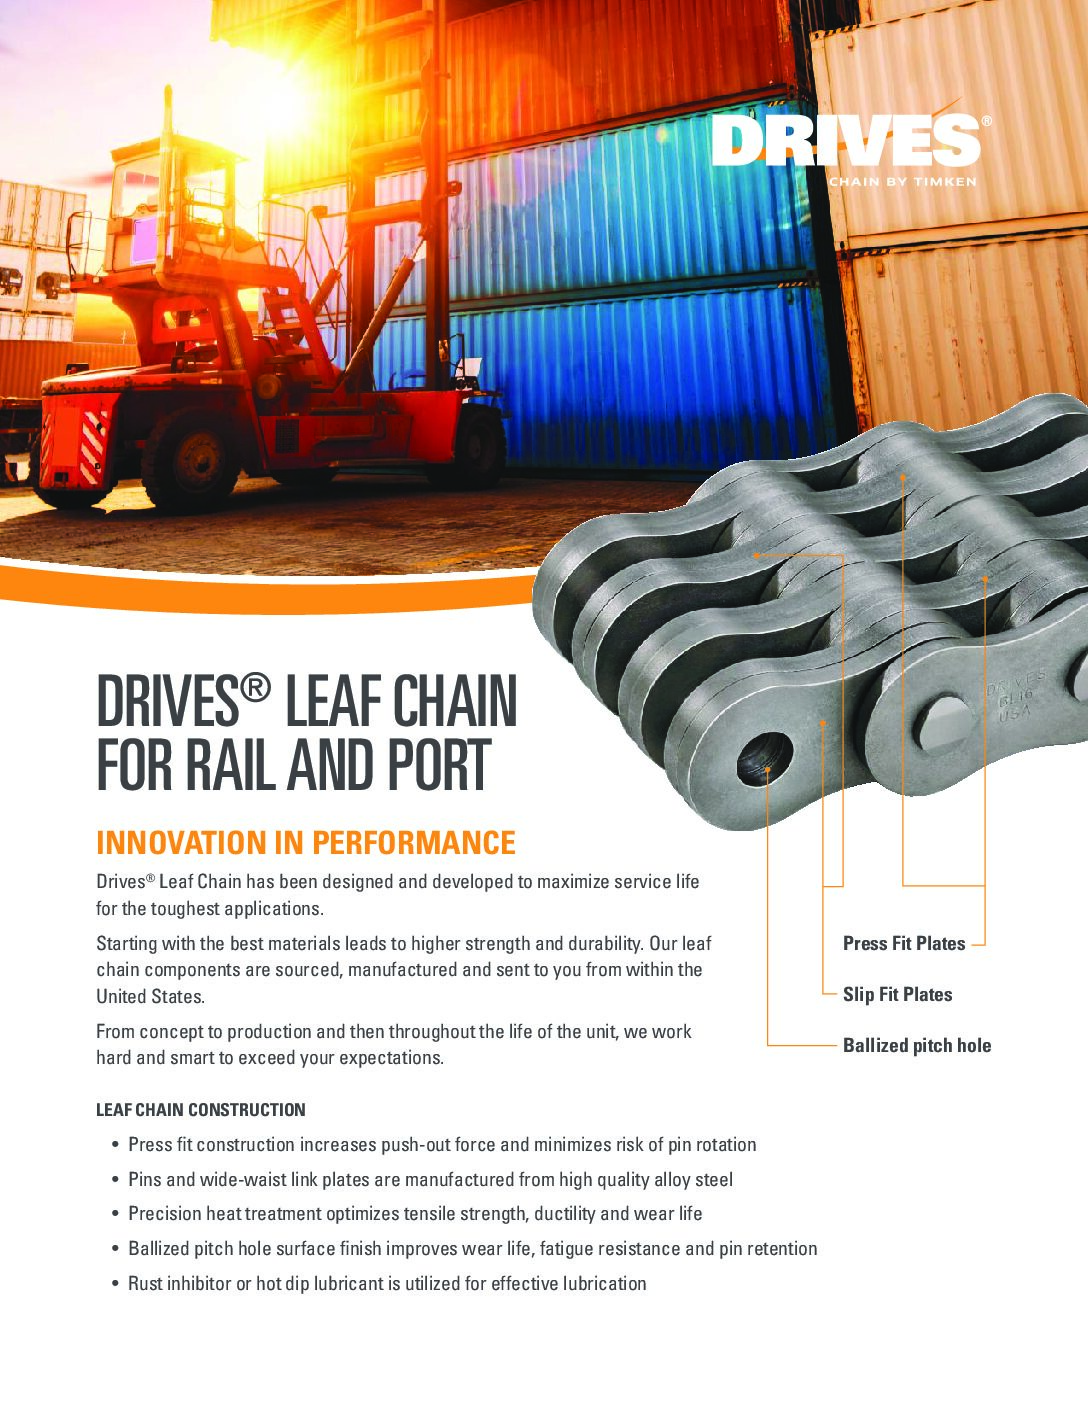 Drives Leaf Chain for Rail and Port